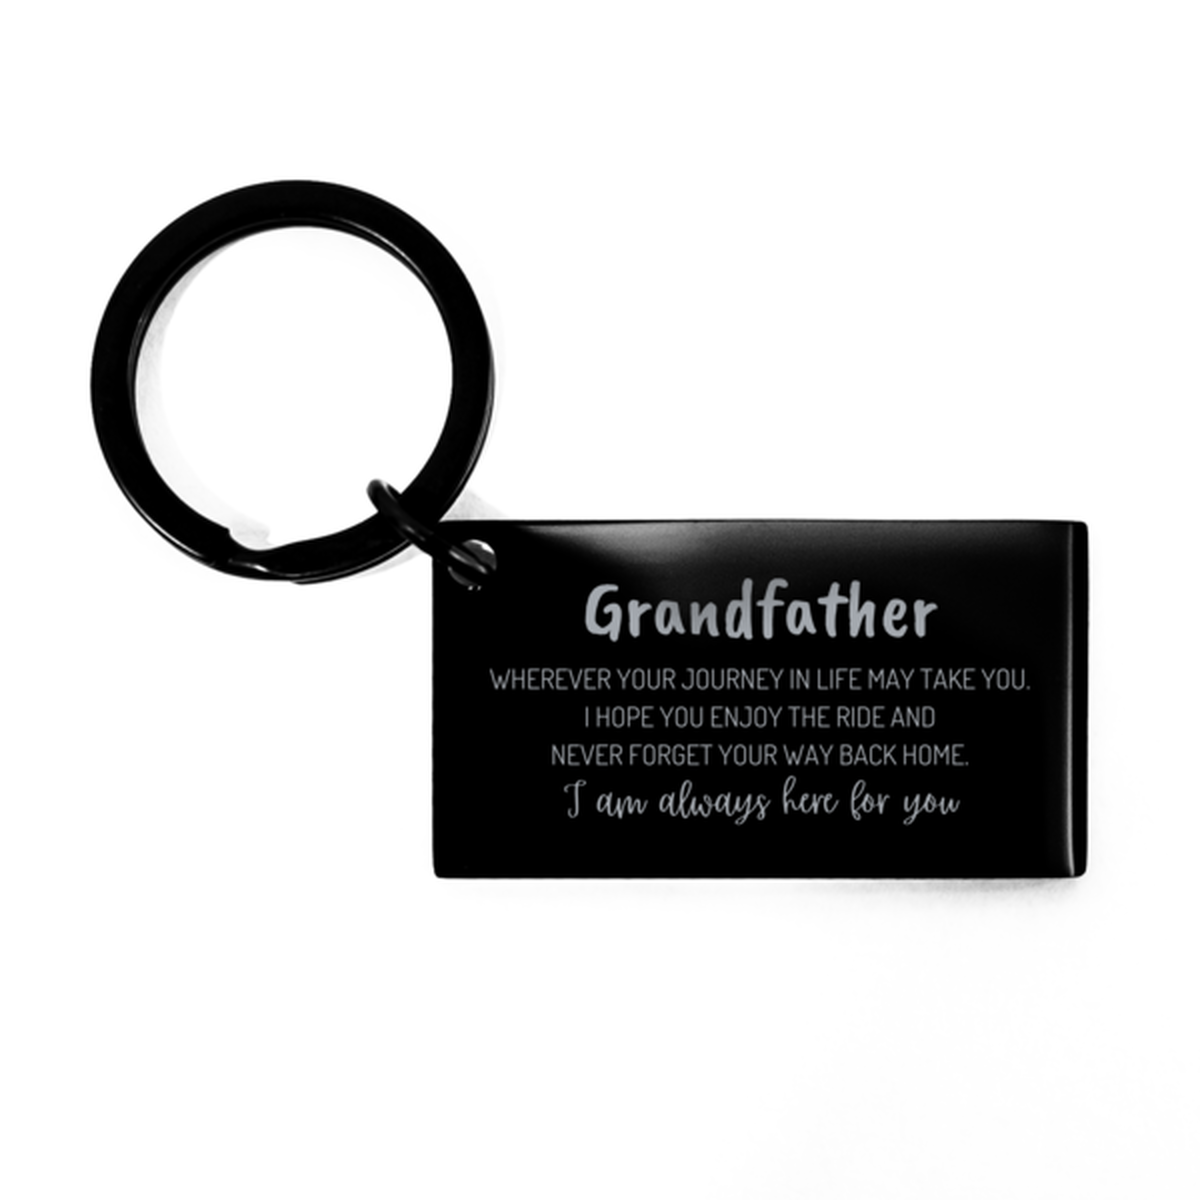 Grandfather wherever your journey in life may take you, I am always here for you Grandfather Keychain, Awesome Christmas Gifts For Grandfather, Grandfather Birthday Gifts for Men Women Family Loved One